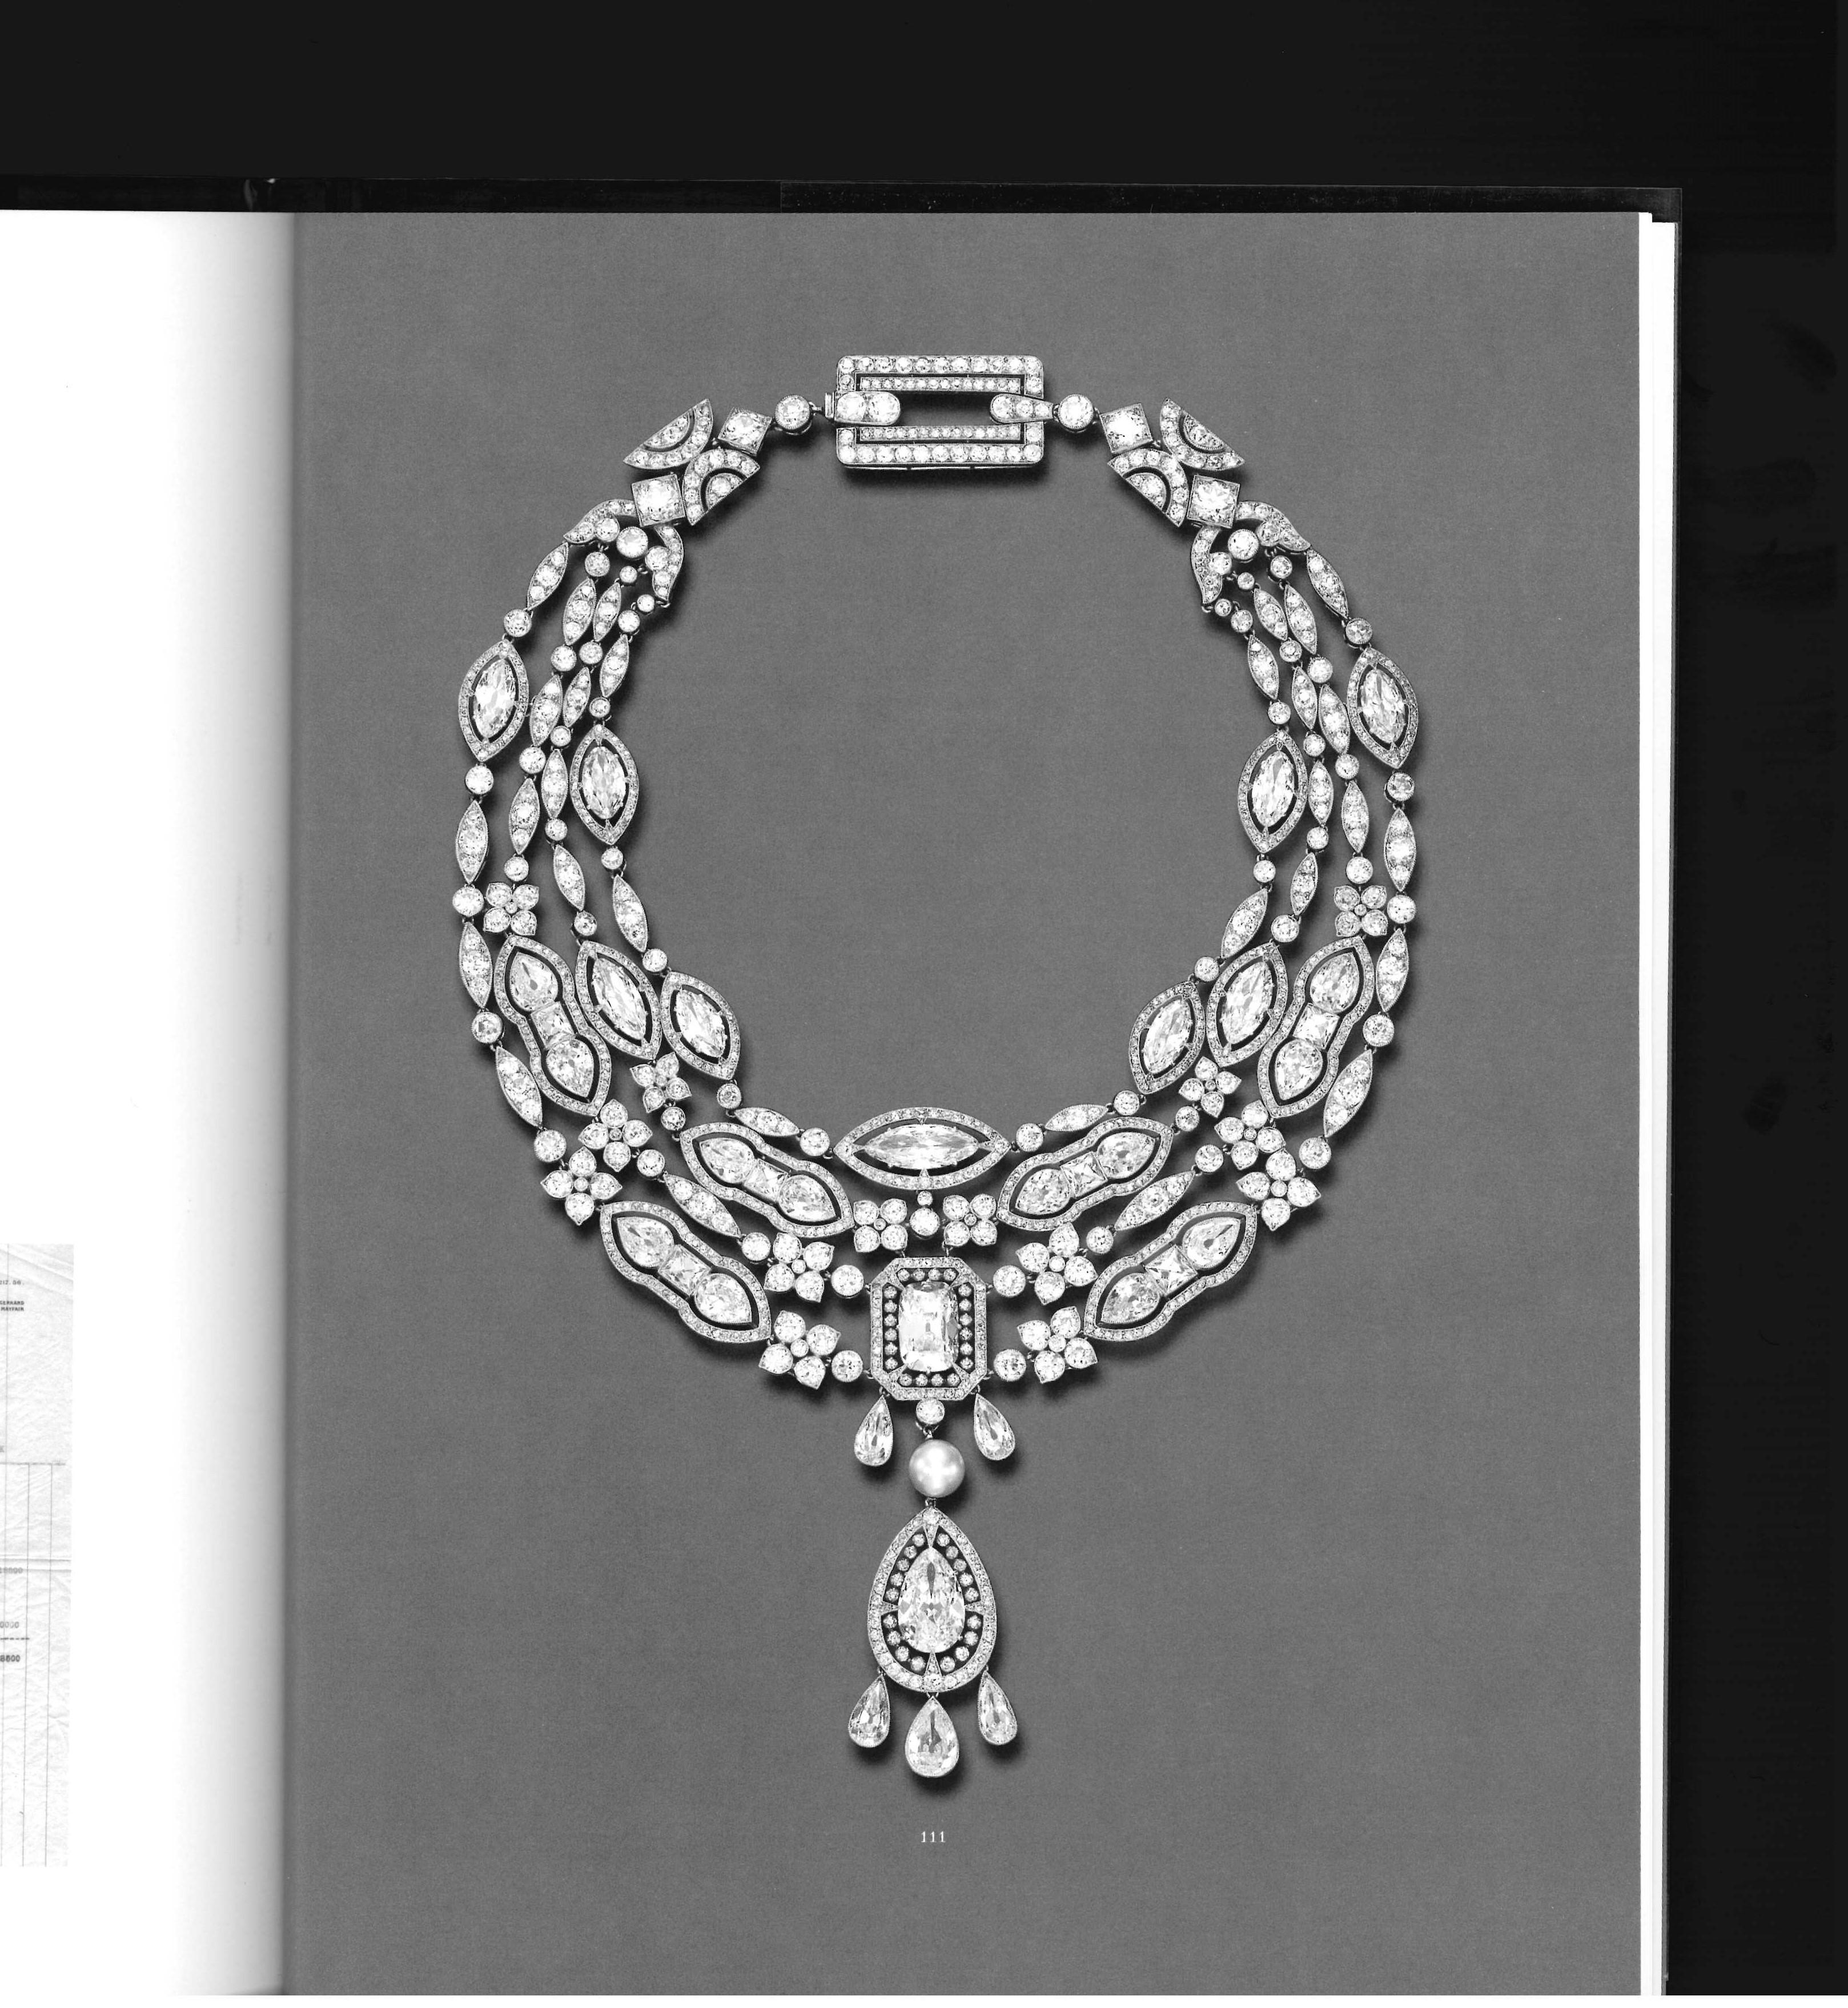 Magnificent Jewels from the Doris Duke Collection, Christies, June 2004 2